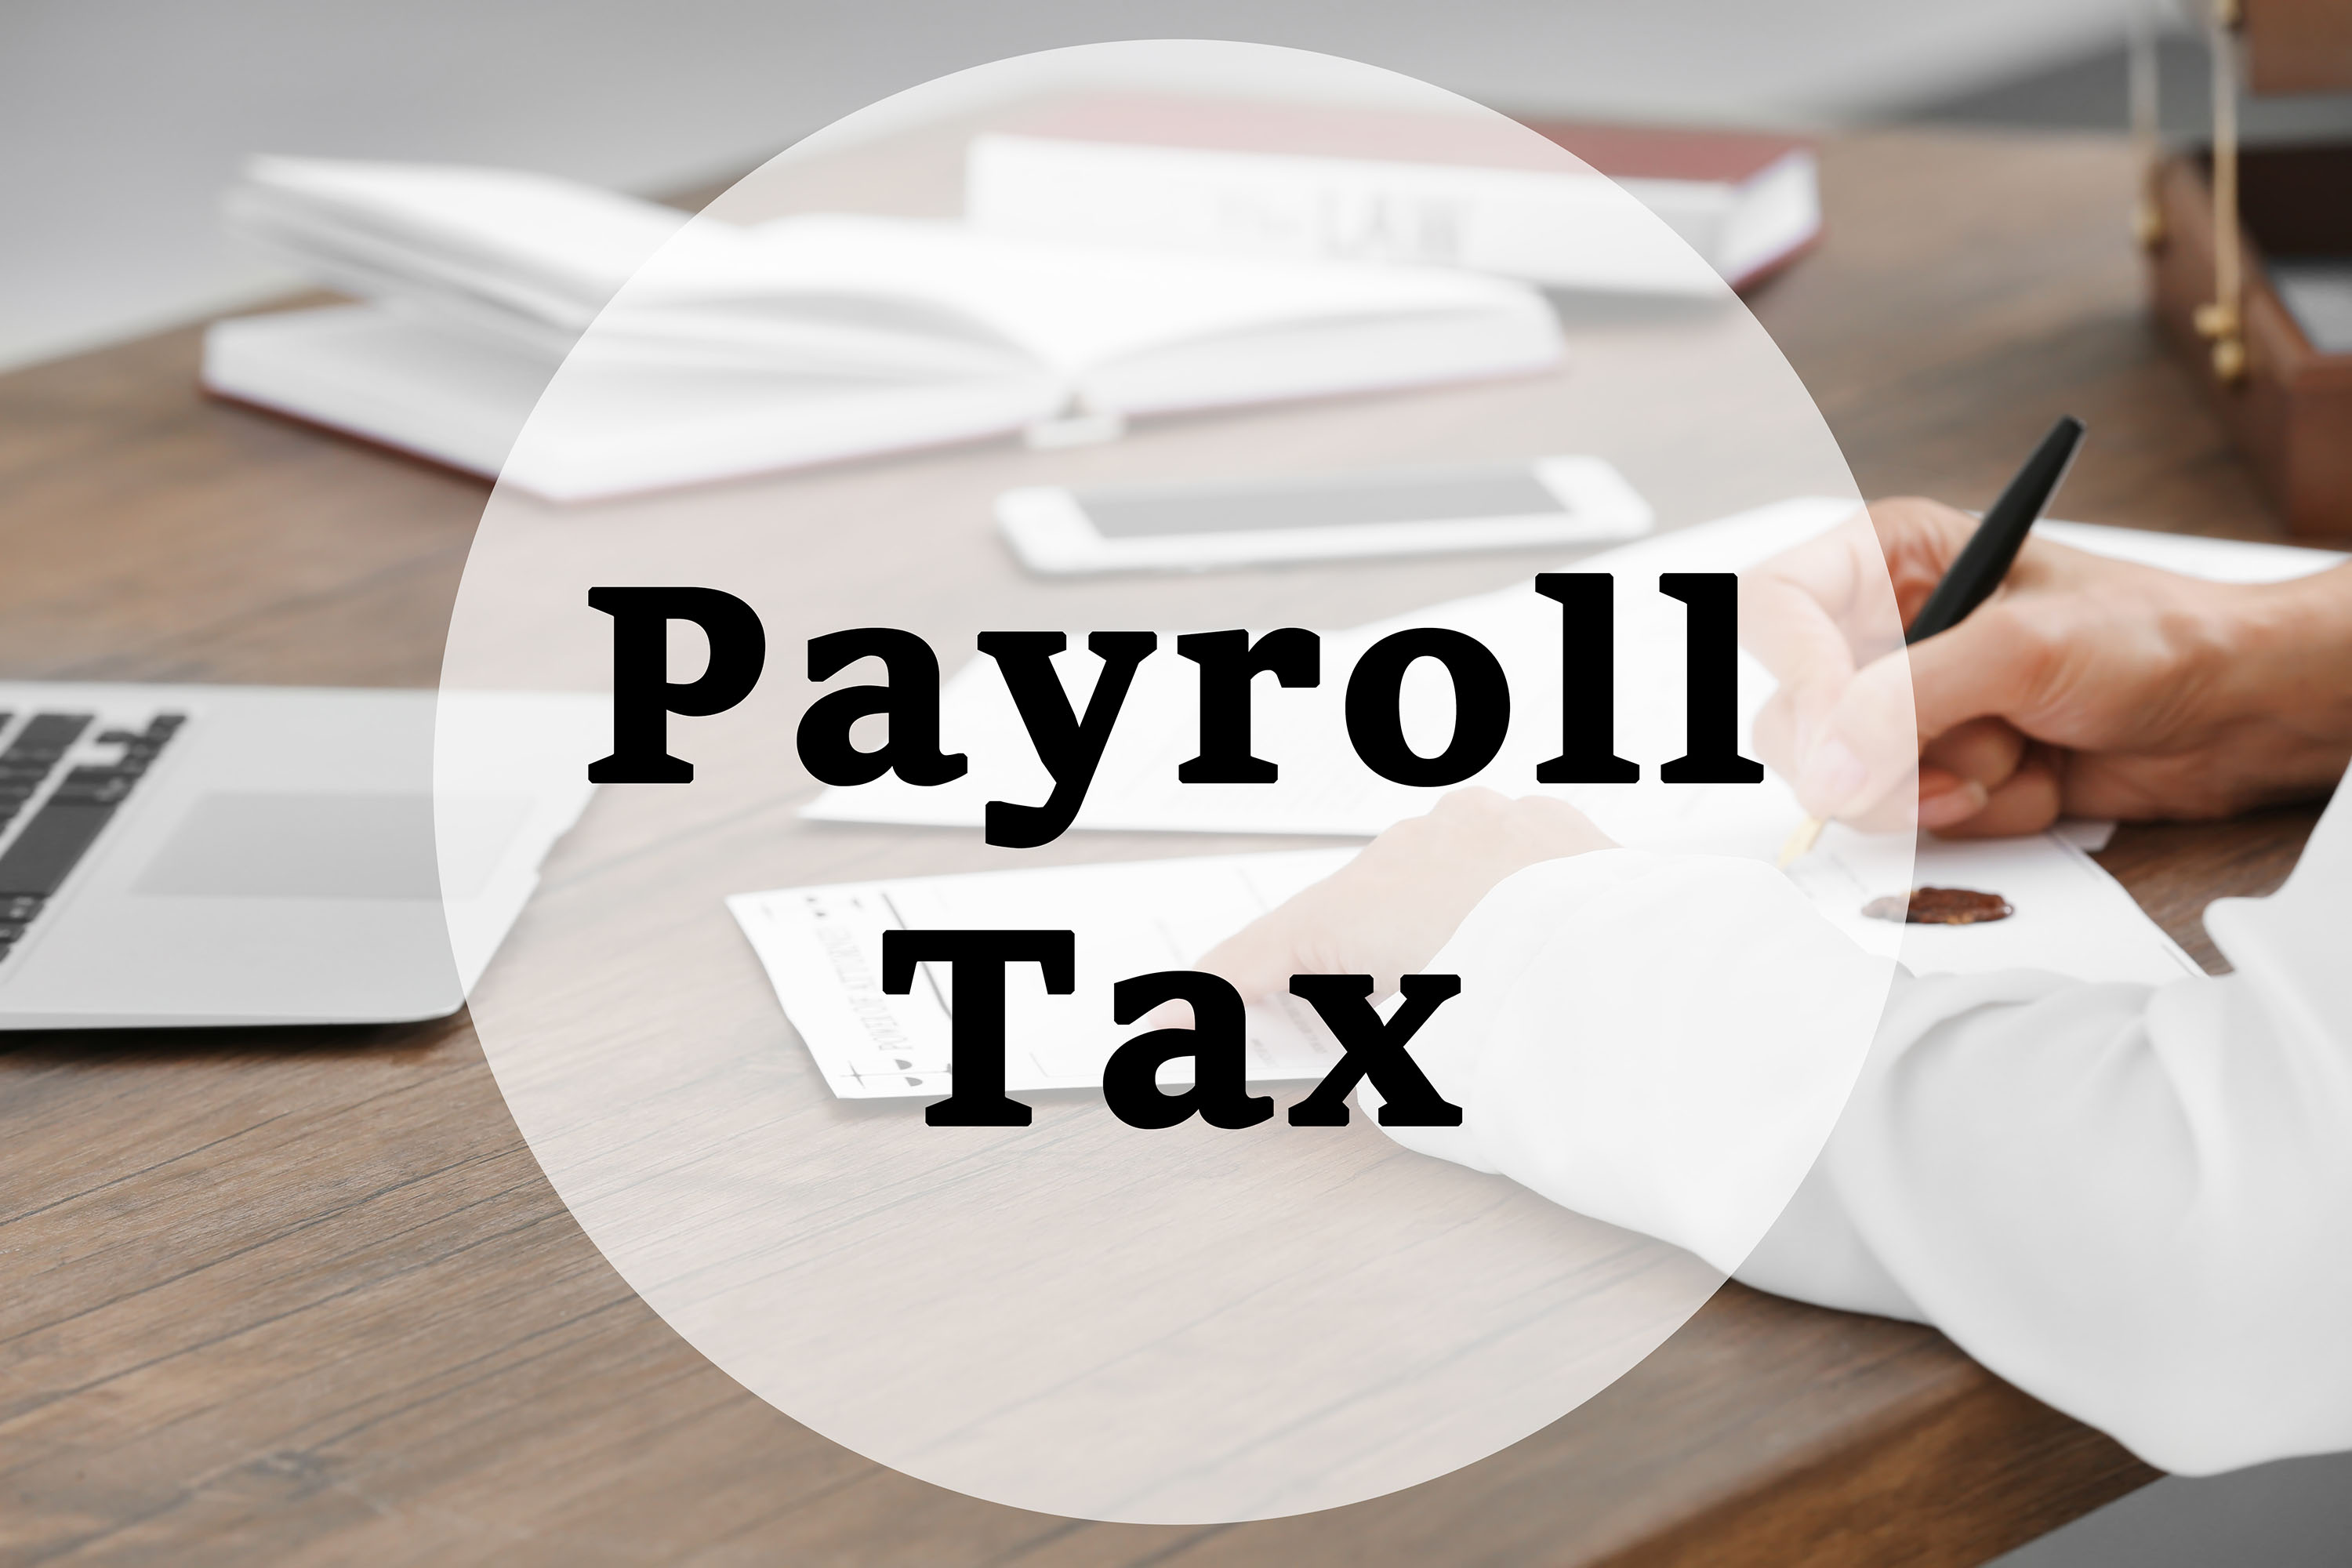 IRS releases final instructions for payroll tax form related to COVID-19 relief